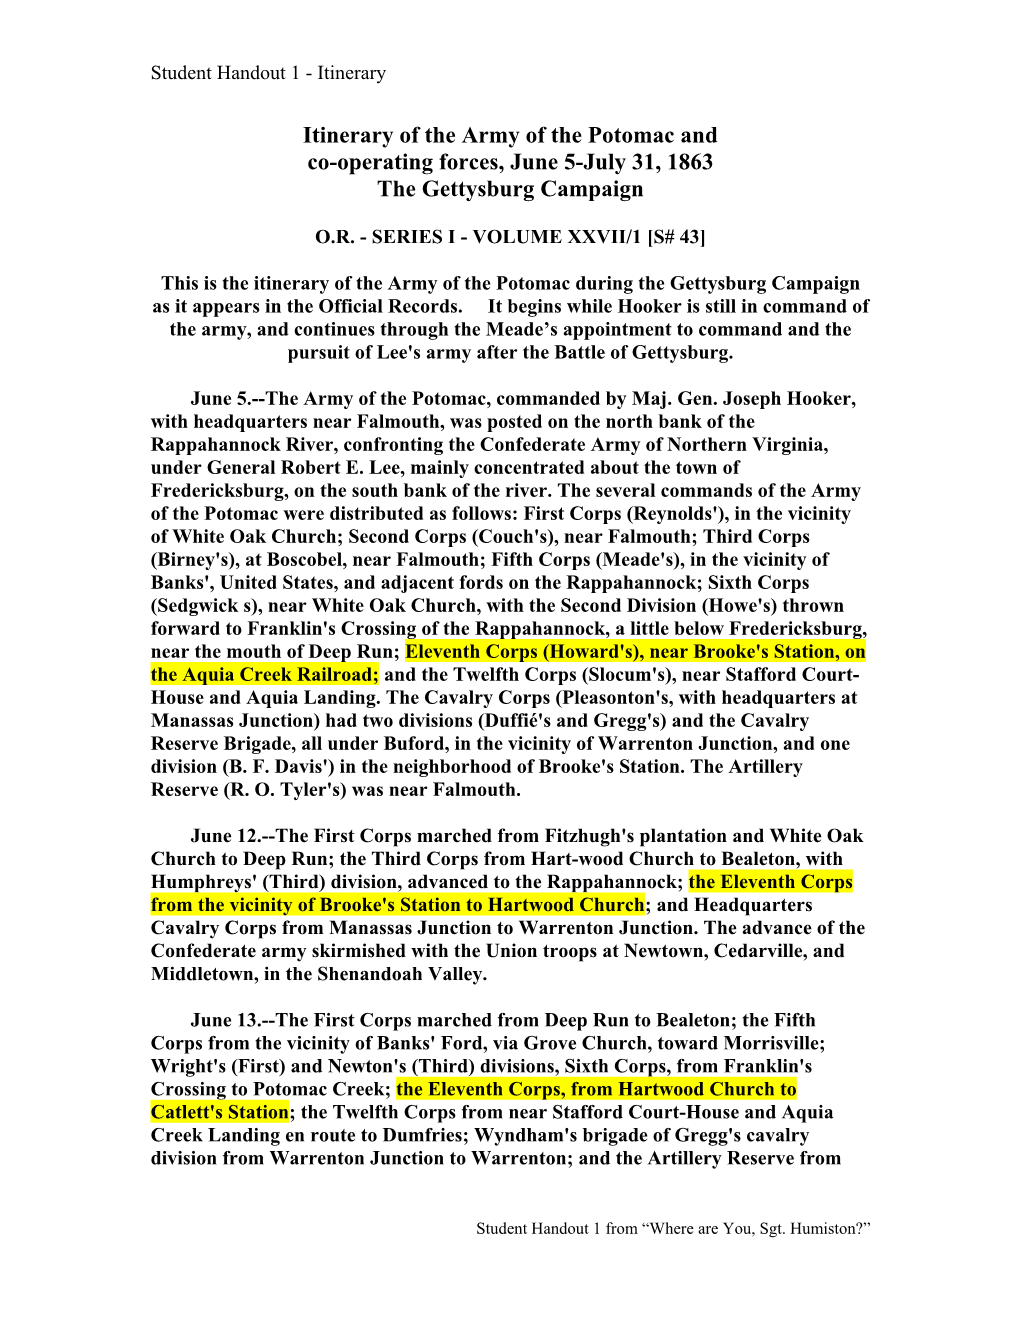 Itinerary of the Army of the Potomac and Co-Operating Forces, June 5-July 31, 1863 the Gettysburg Campaign